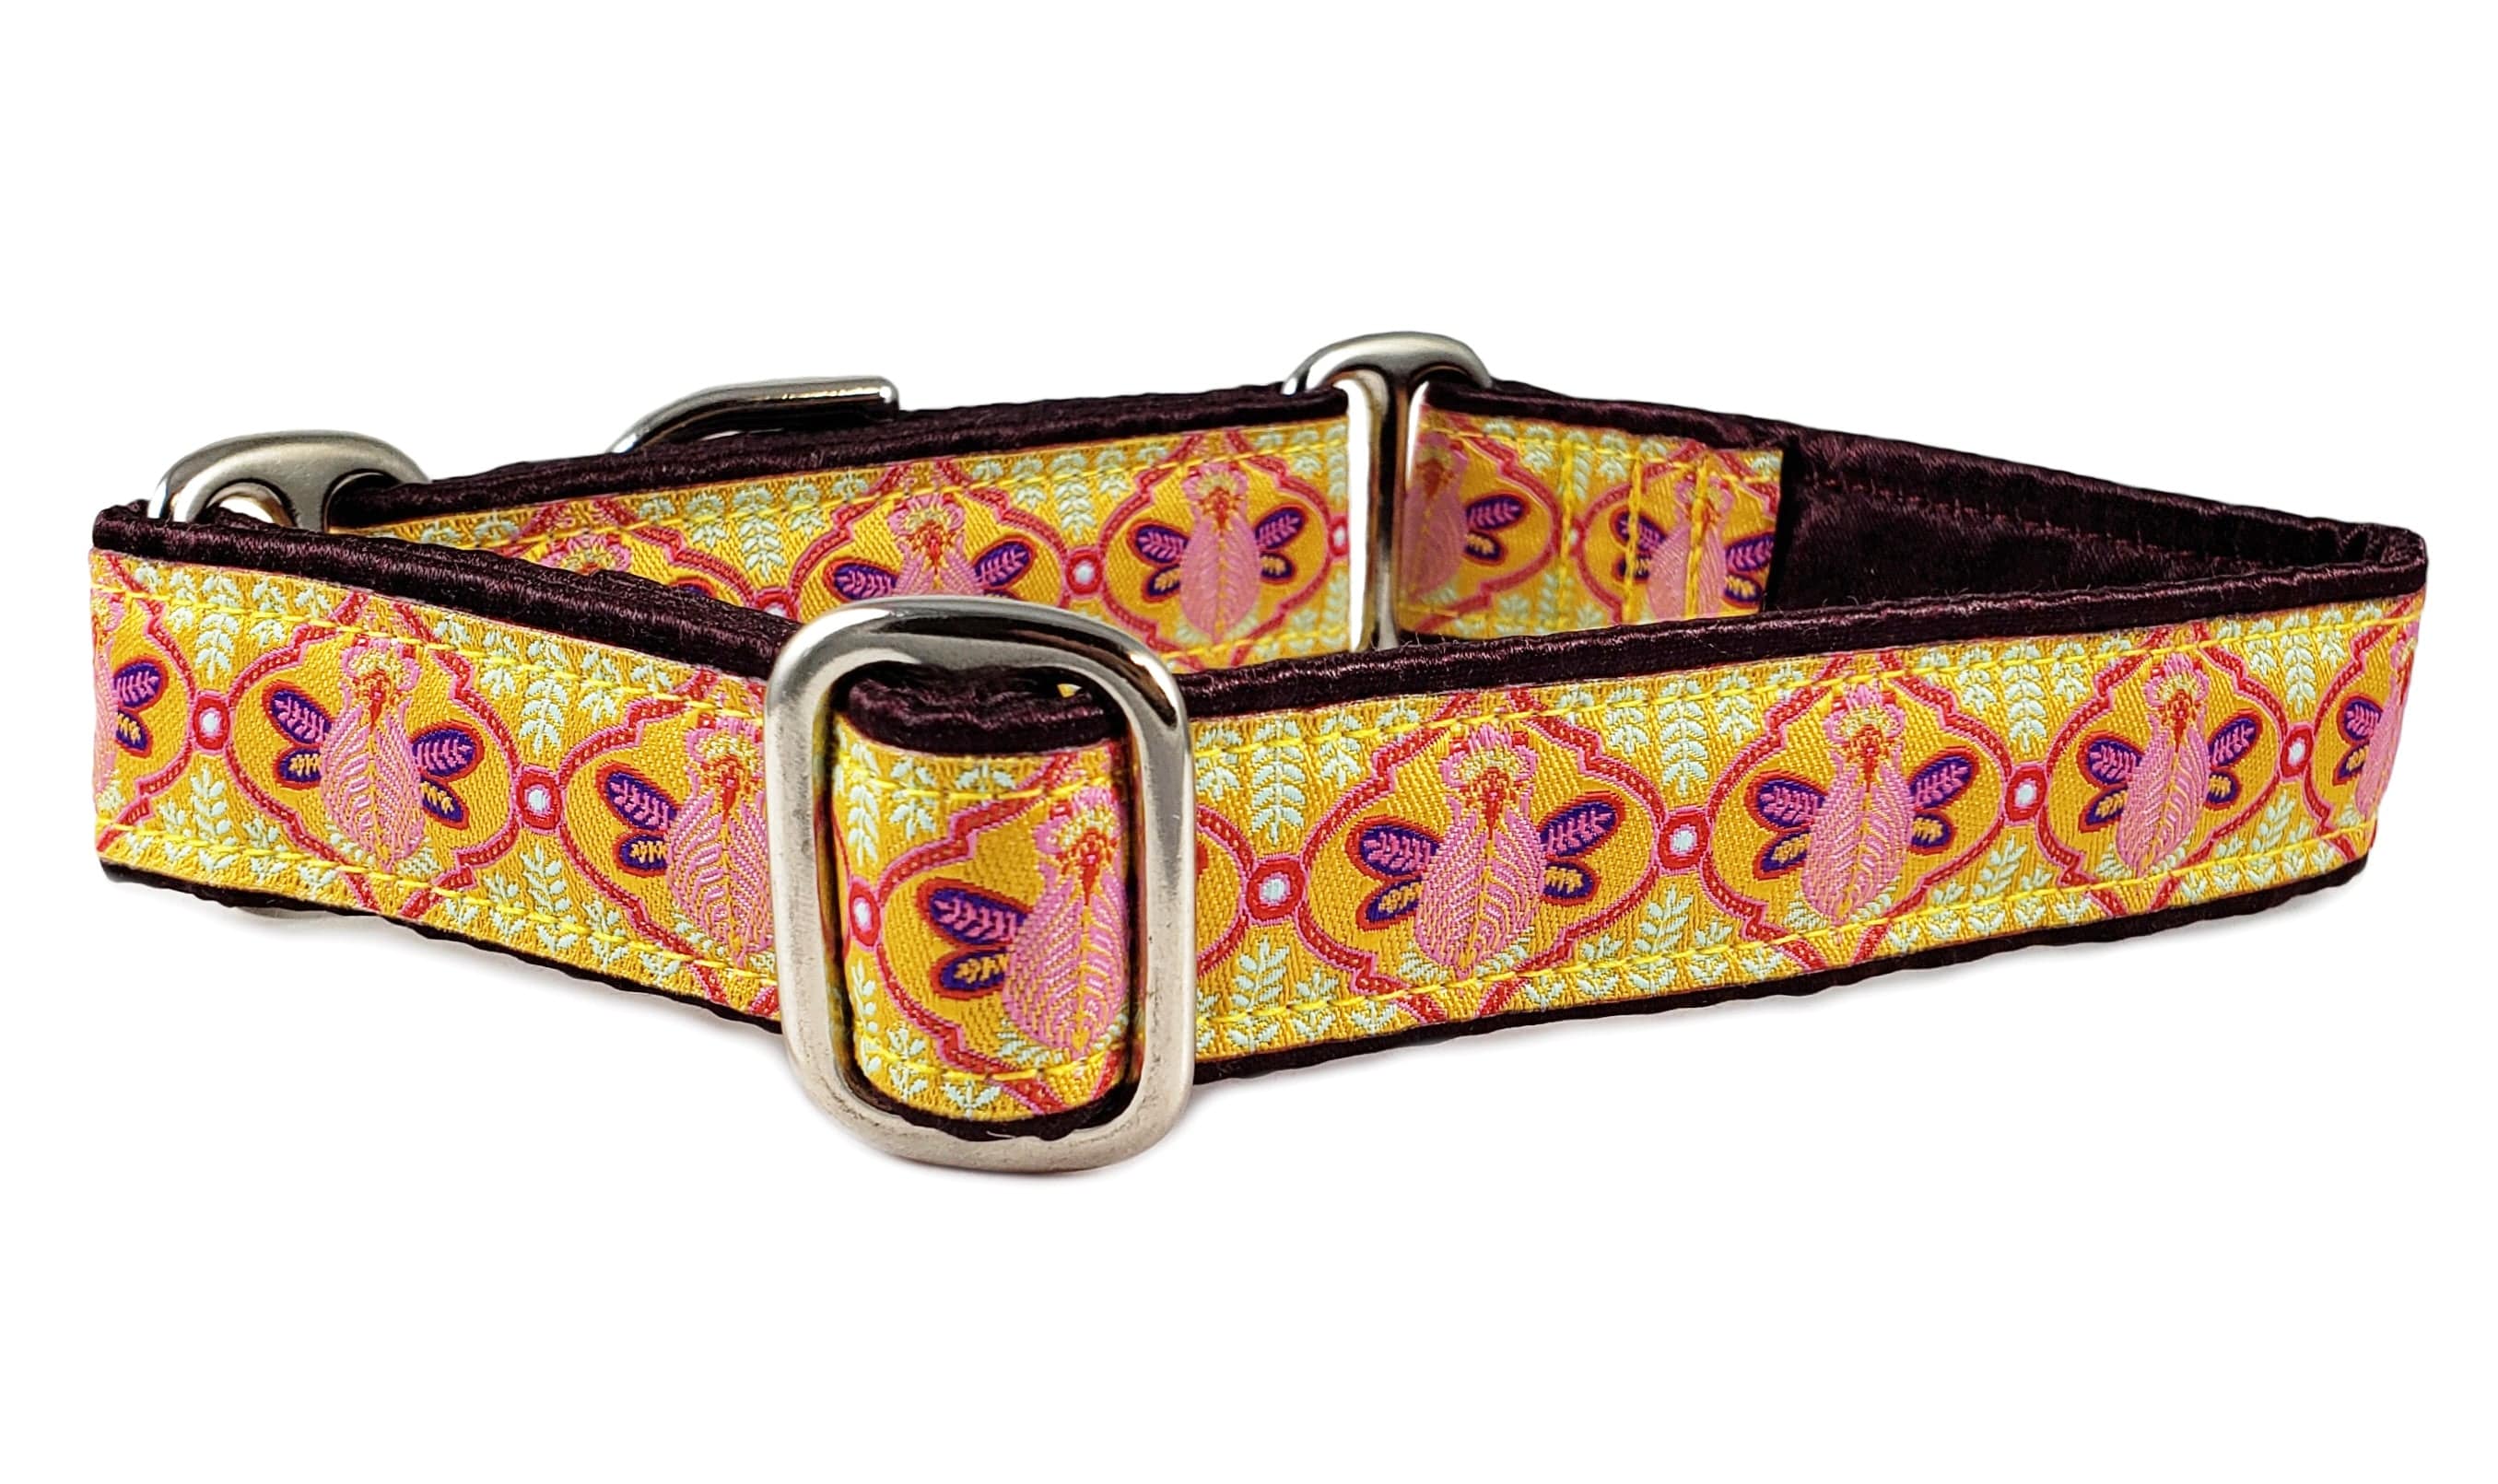 The Hound Haberdashery Collar Lotus Bee in Goldenrod & Pink - Martingale Dog Collar or Buckle Dog Collar - 1" Width